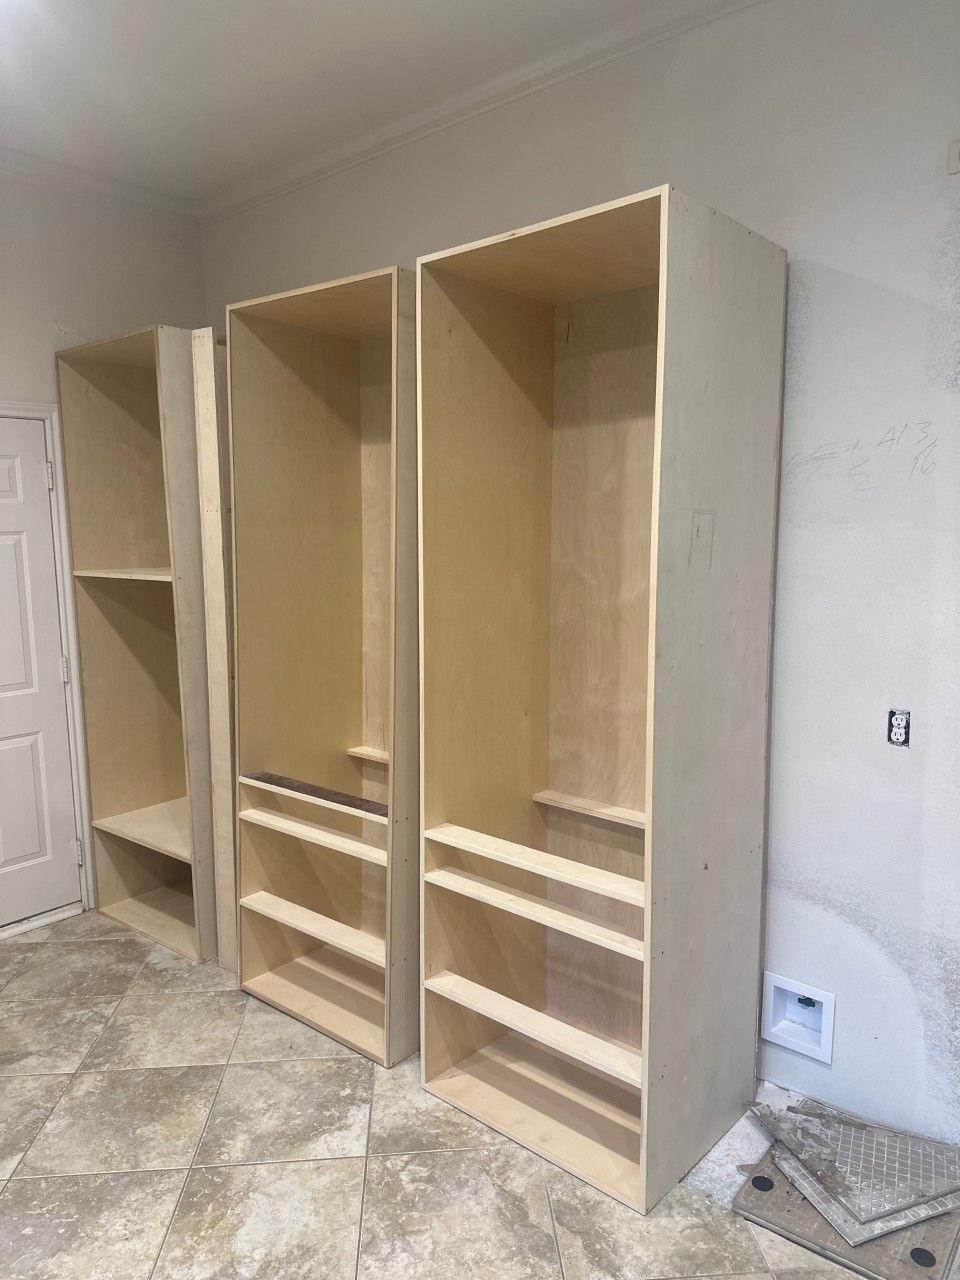 Scrap wood/wrong size cabinets